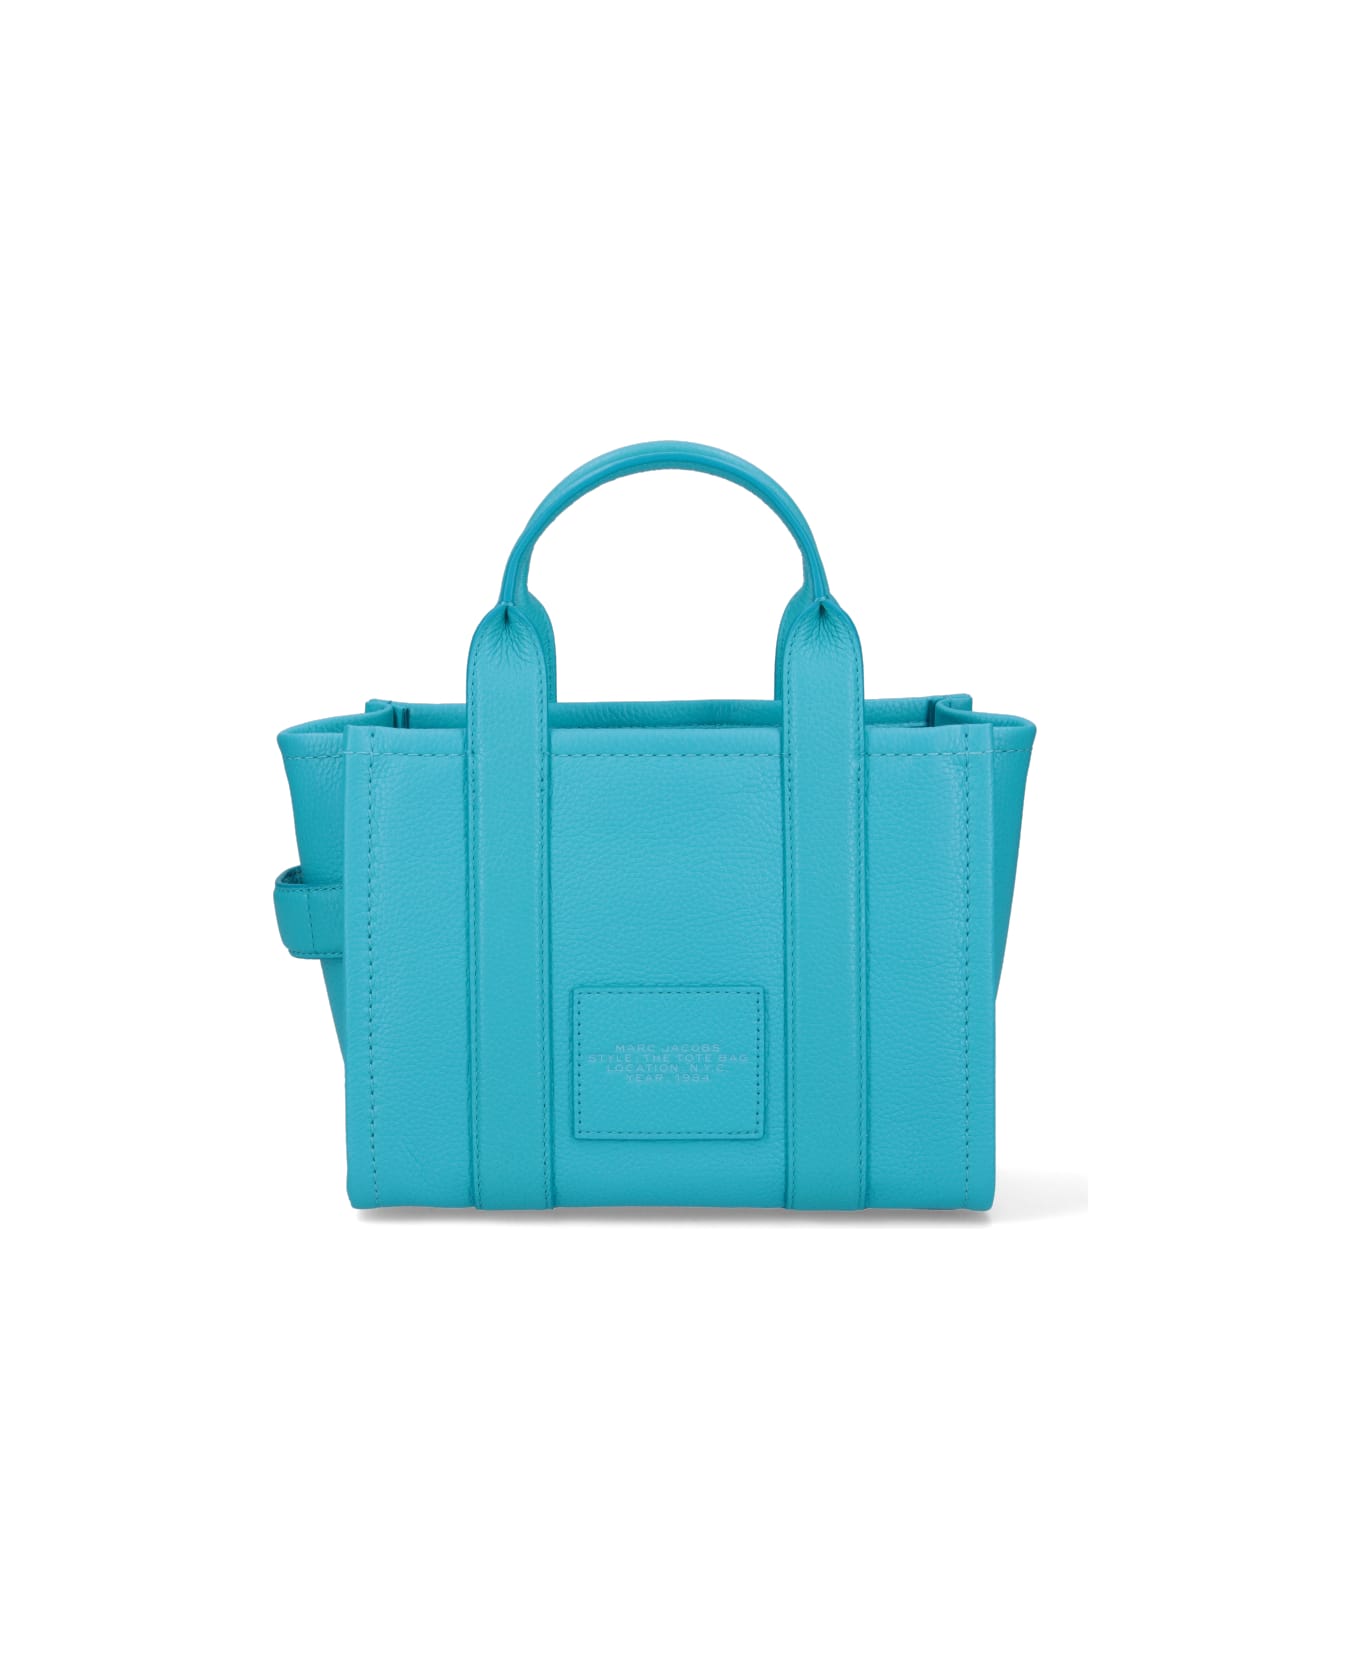 Marc Jacobs The Tote Bag - Light blue トートバッグ